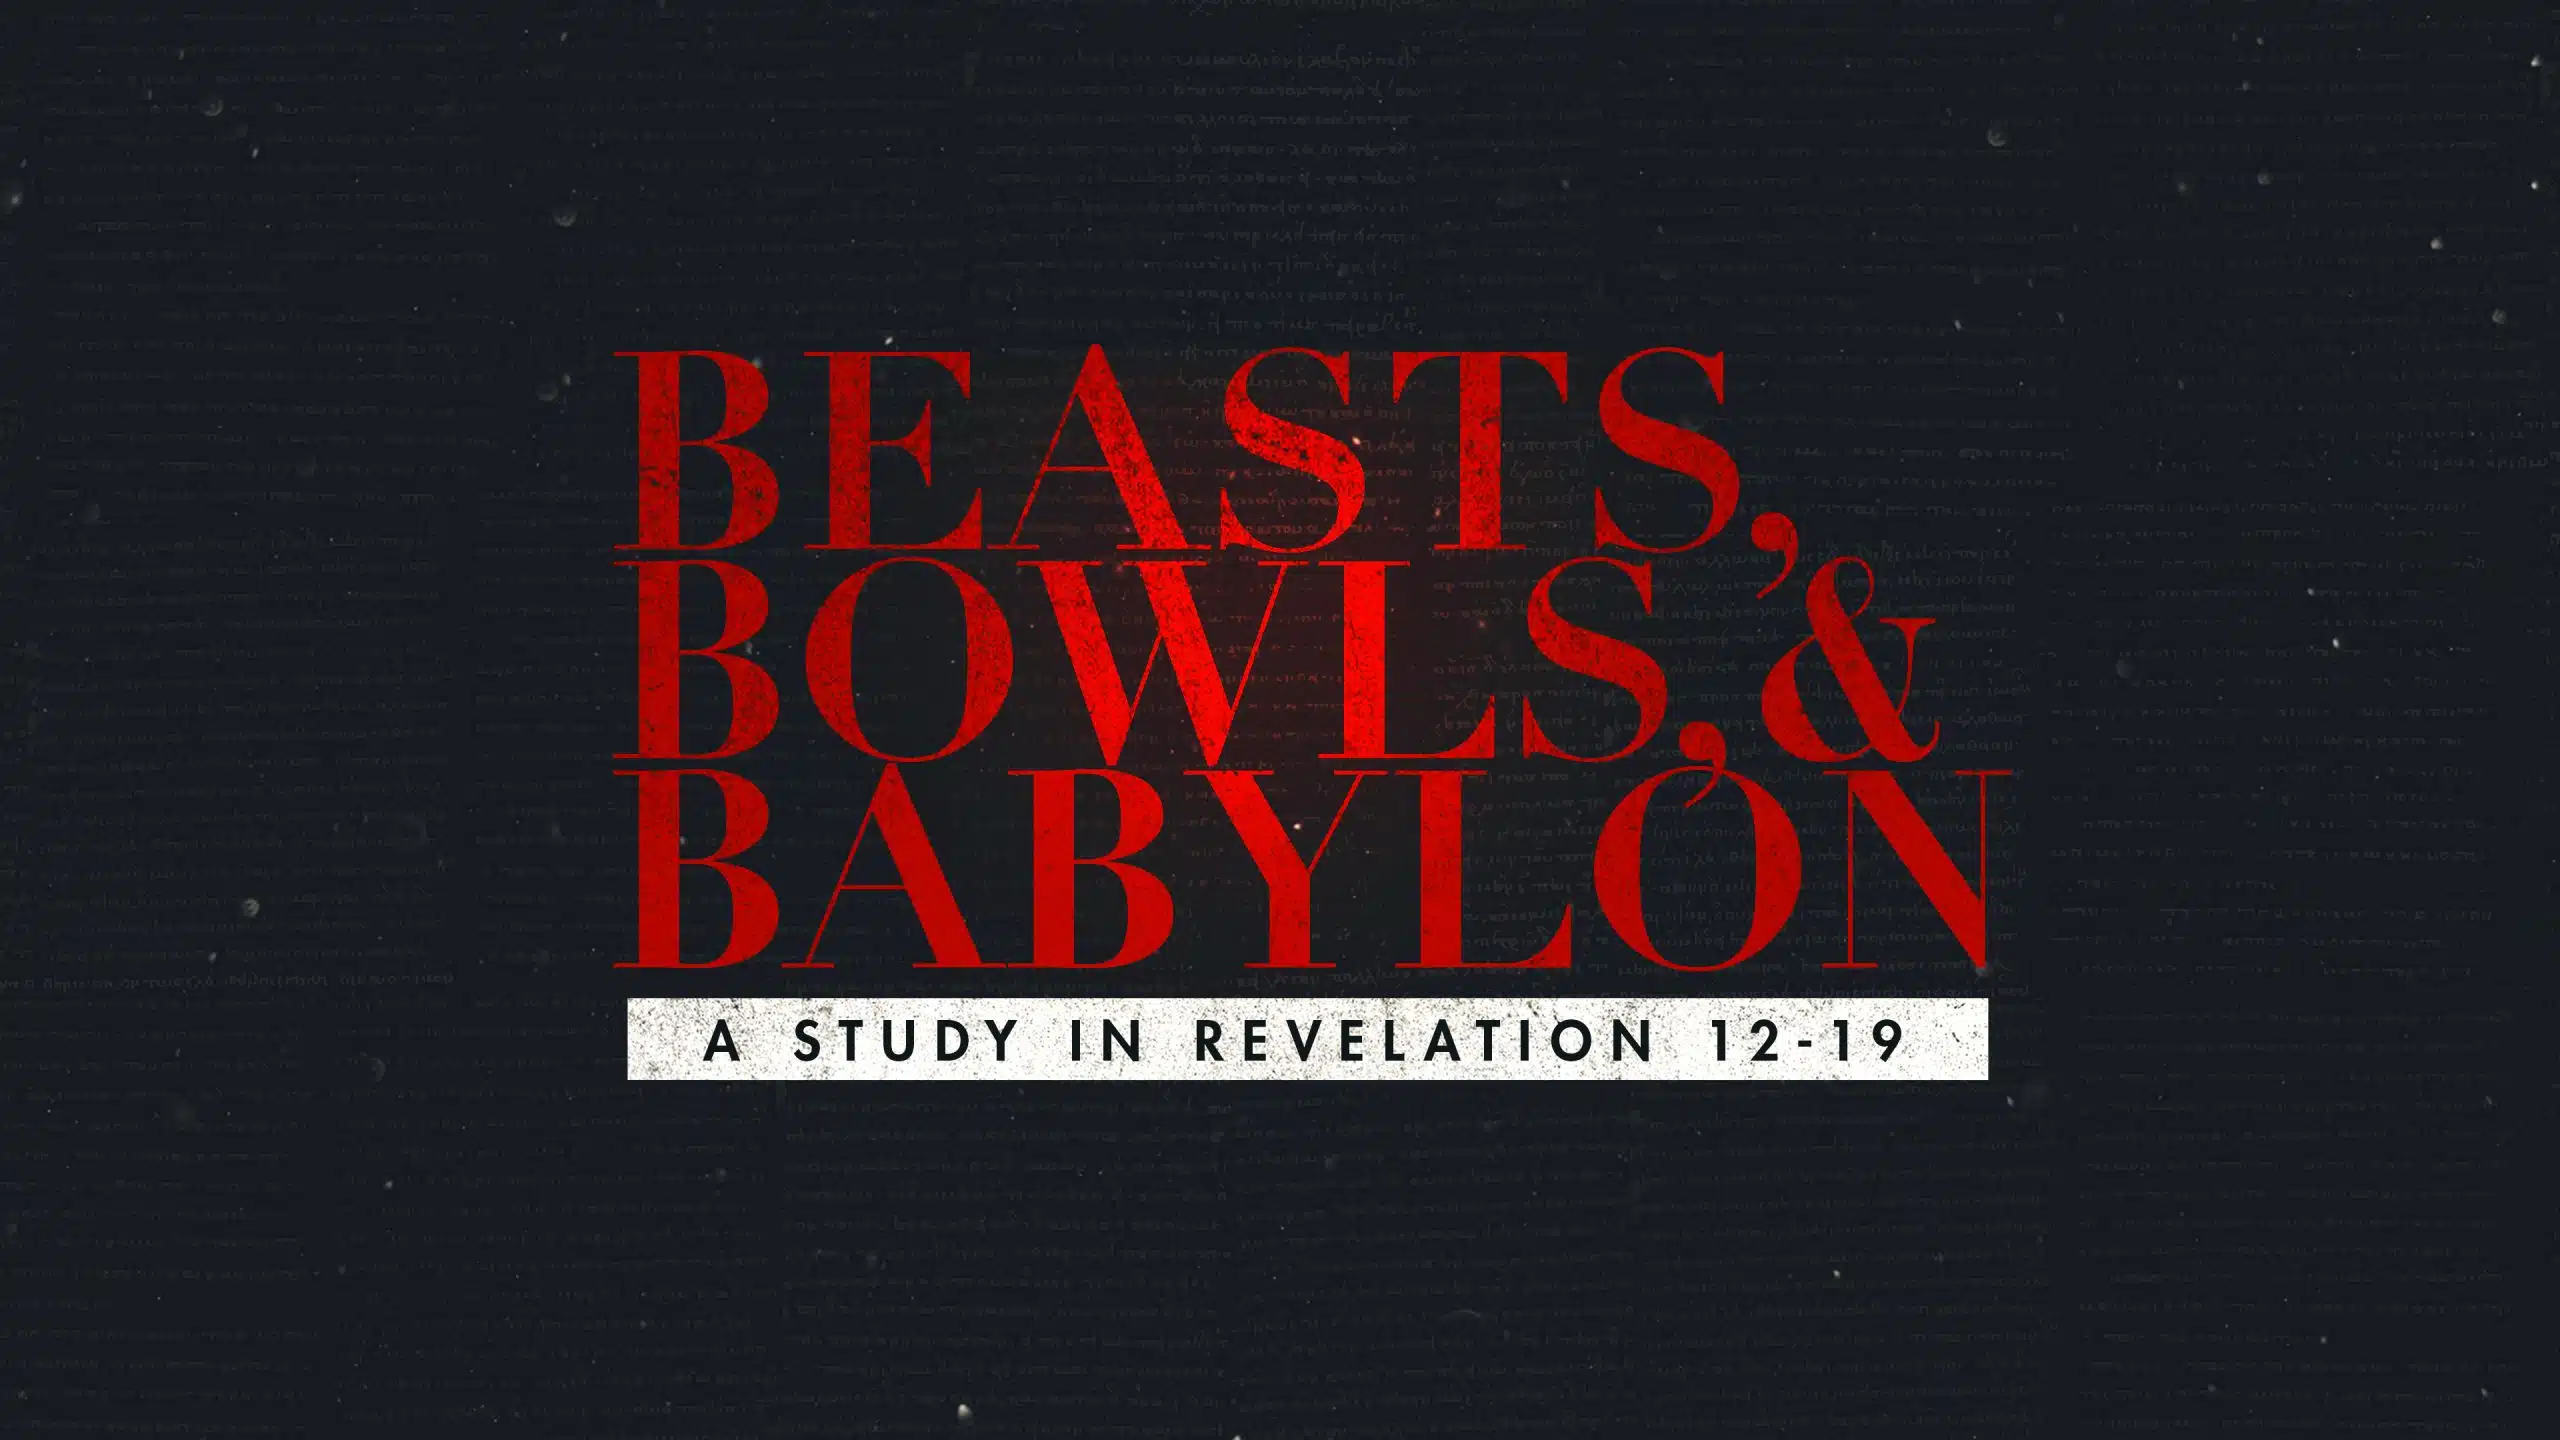 Featured image for “Beasts, Bowls & Babylon”